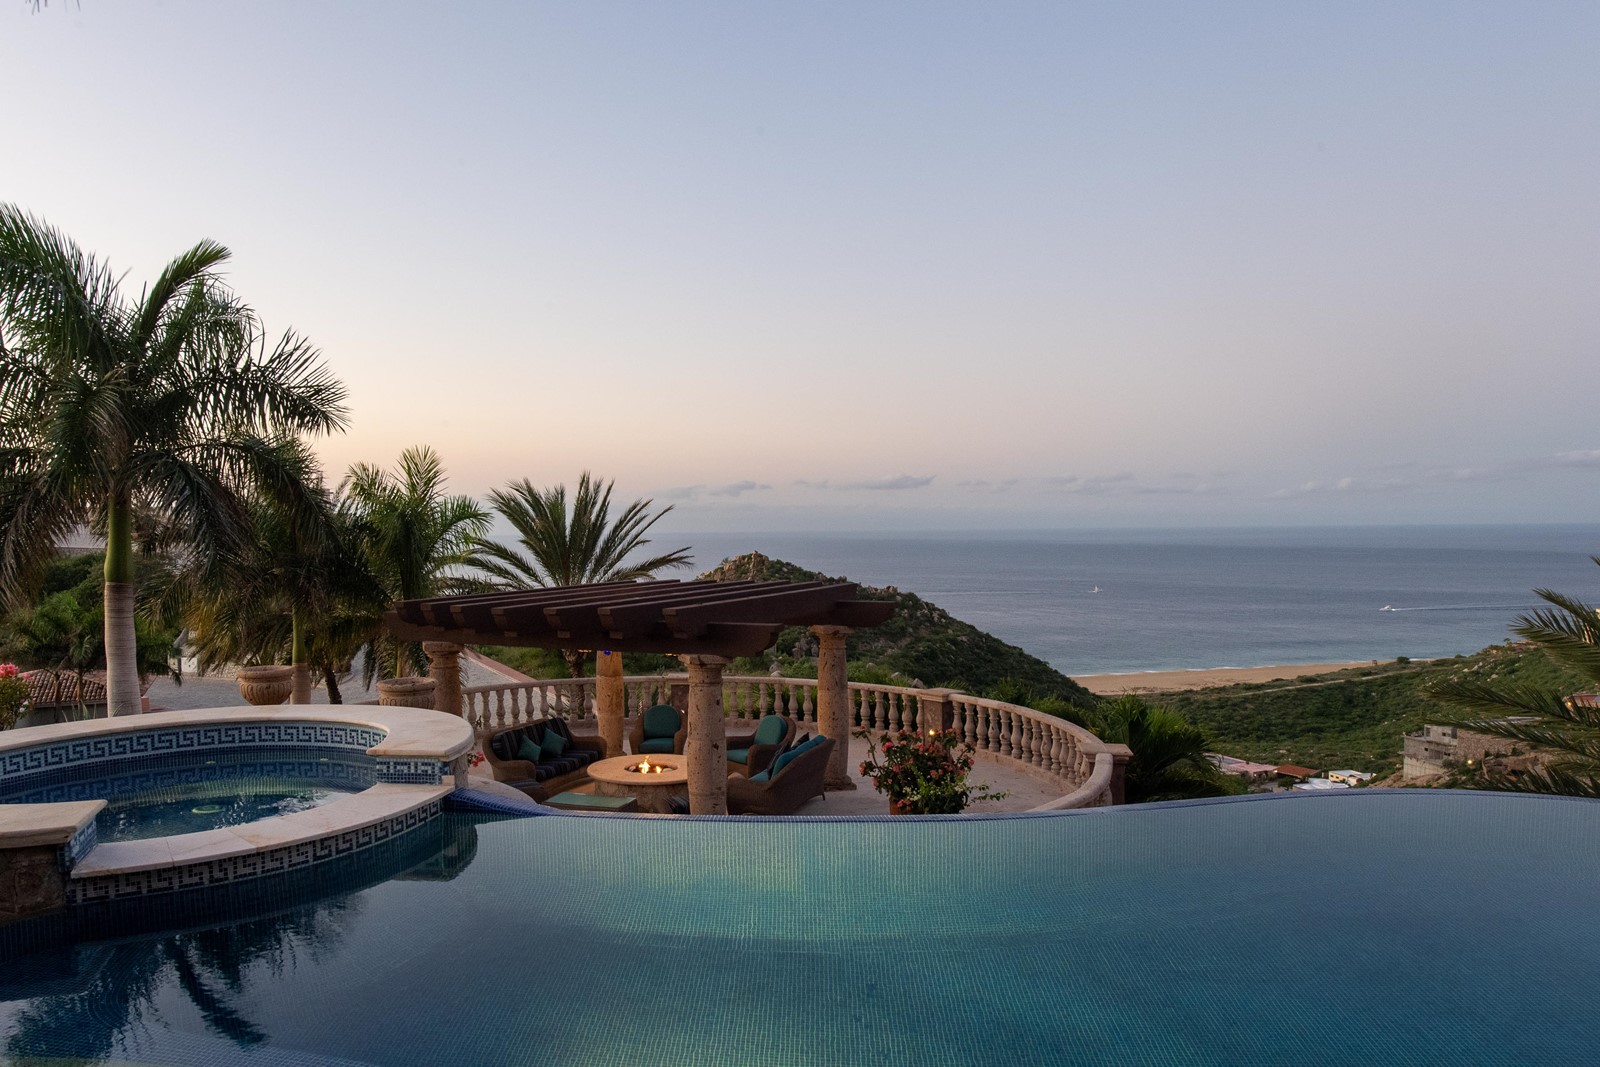 View of the ocean from the infinity pool outside of this Los Cabos villa.